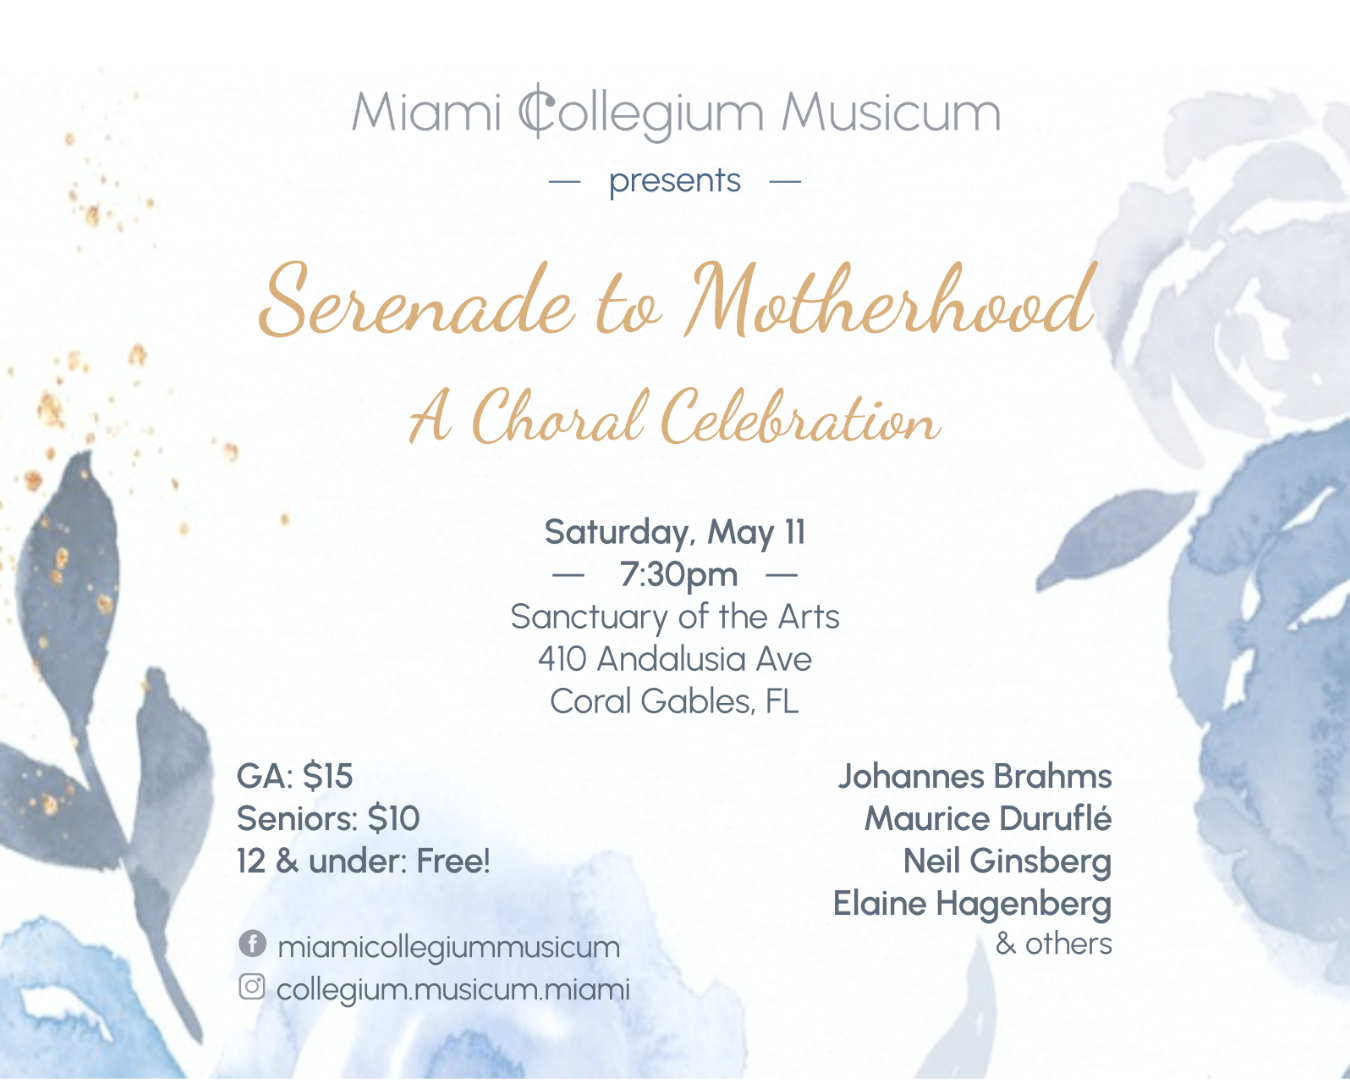 Poster for Serenade to Motherhood concert. Prices: General Admission - $15, Seniors - $10, Children under 12 - Free. Featured composers include Johannes Brahms, Maurice Durufle, Neil Ginsberg, and Elaine Hagenberg.